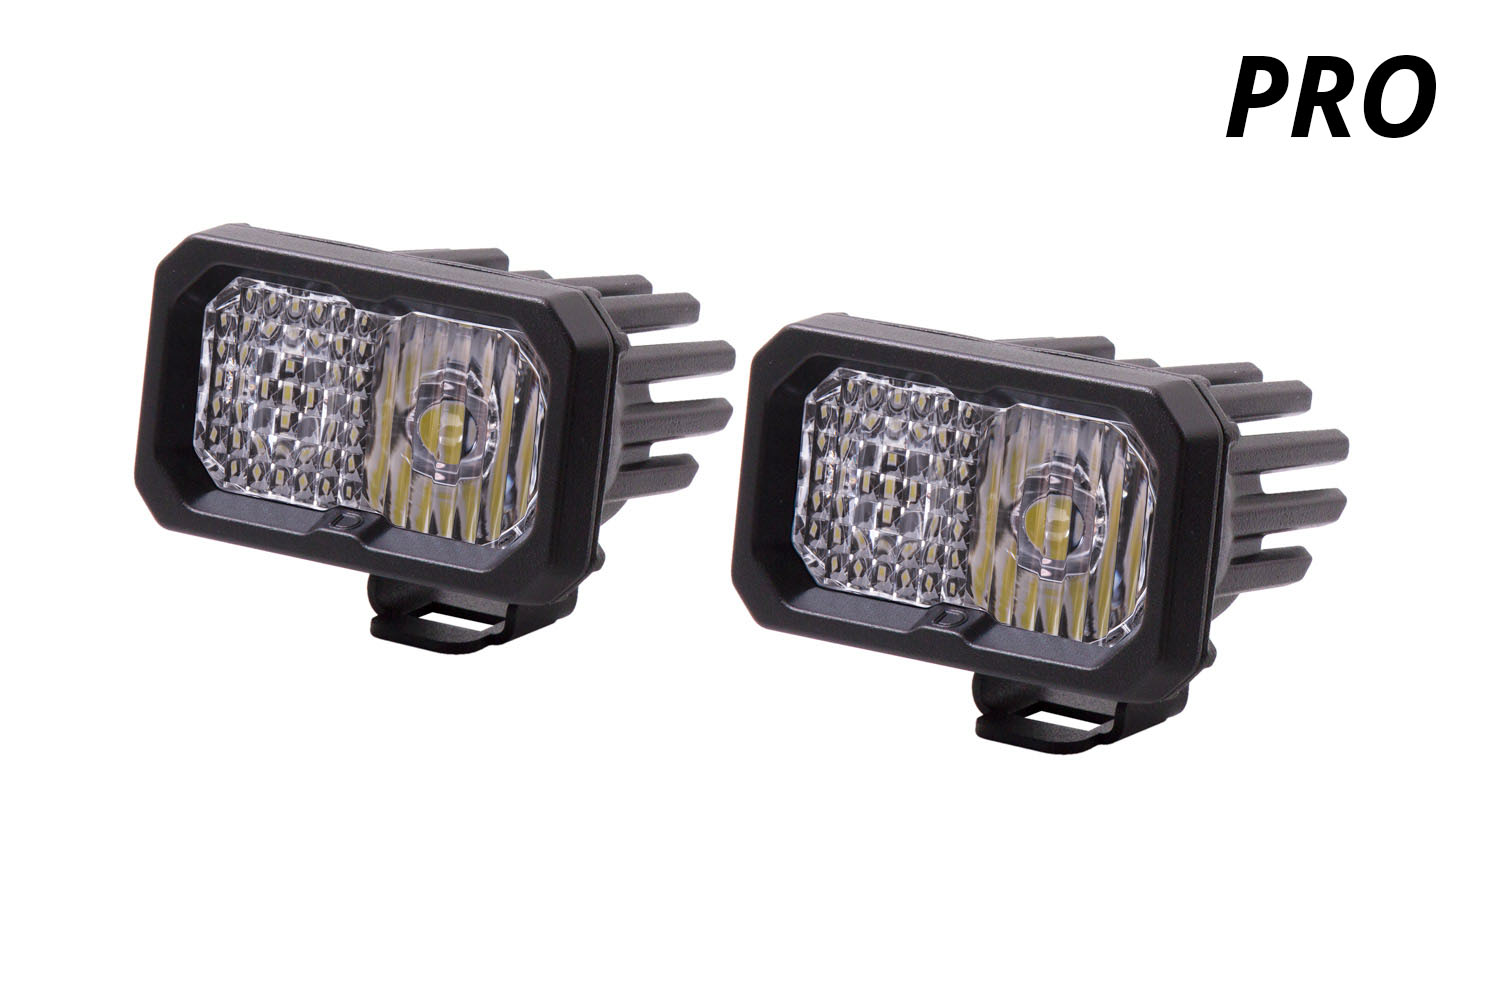 Diode Dynamics Stage Series 2 Inch LED Pod, Pro White Spot Standard ABL Pair - Click Image to Close